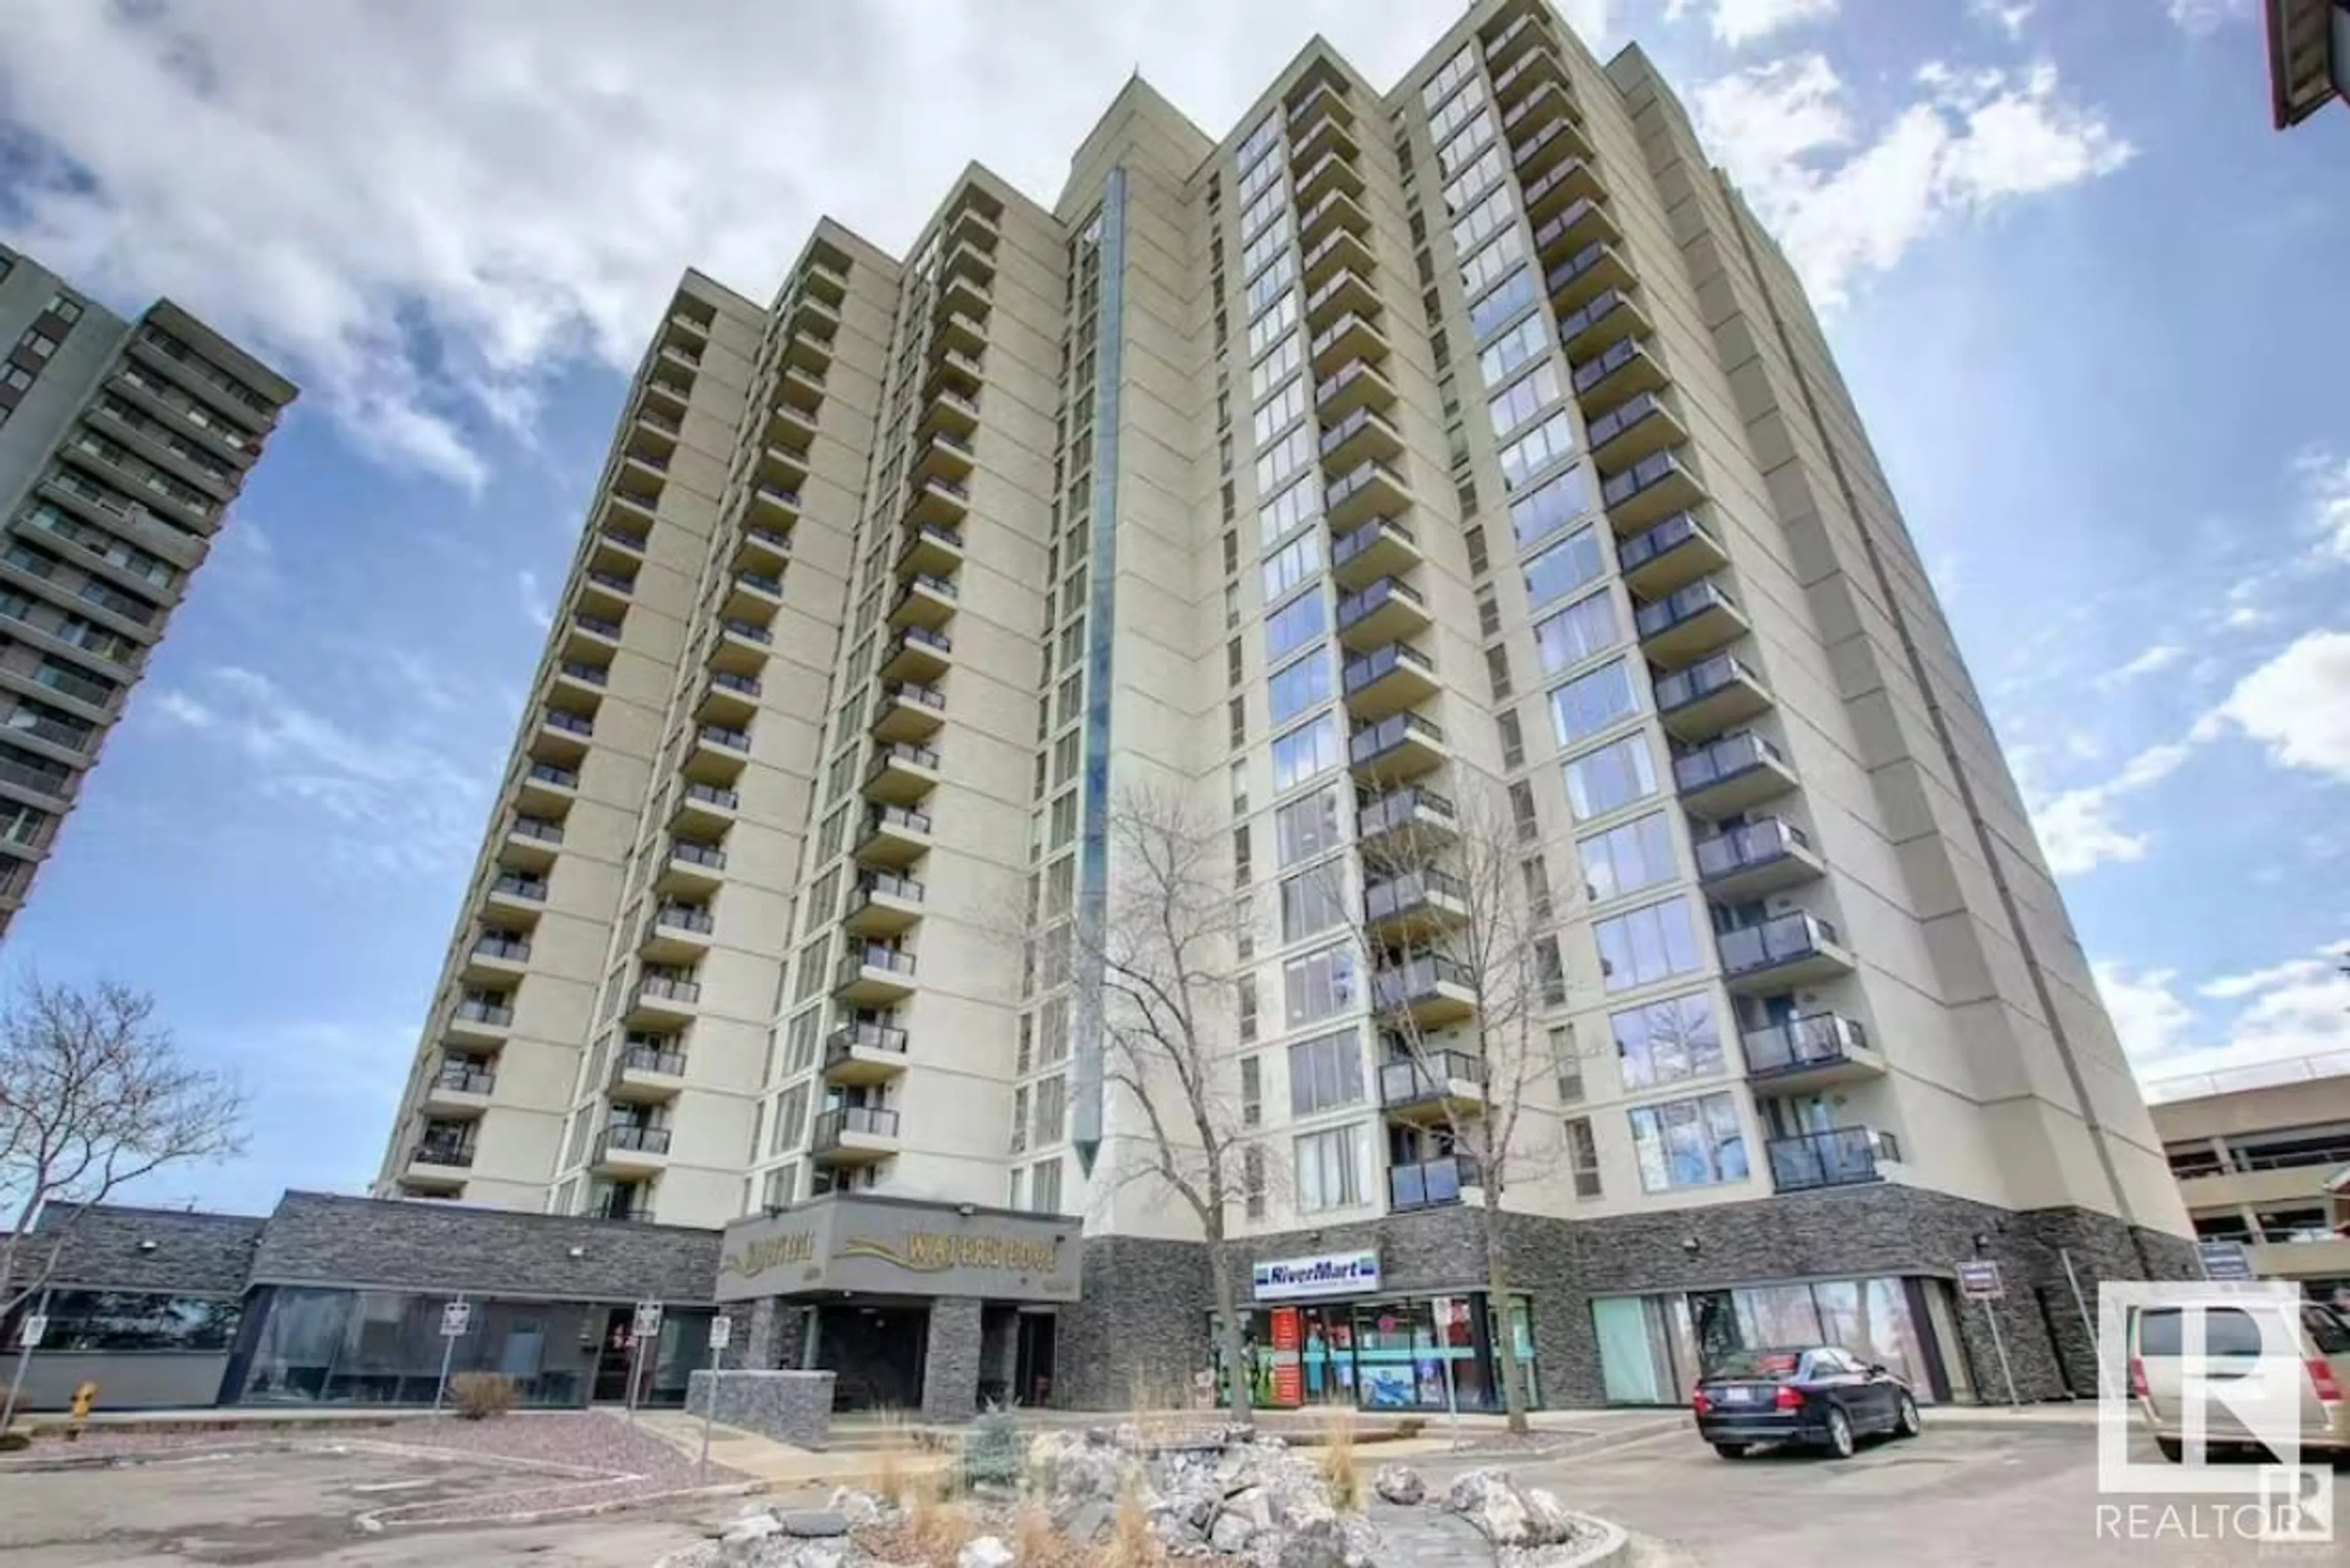 A pic from exterior of the house or condo for #903 10149 SASKATCHEWAN DR NW, Edmonton Alberta T6E6B6